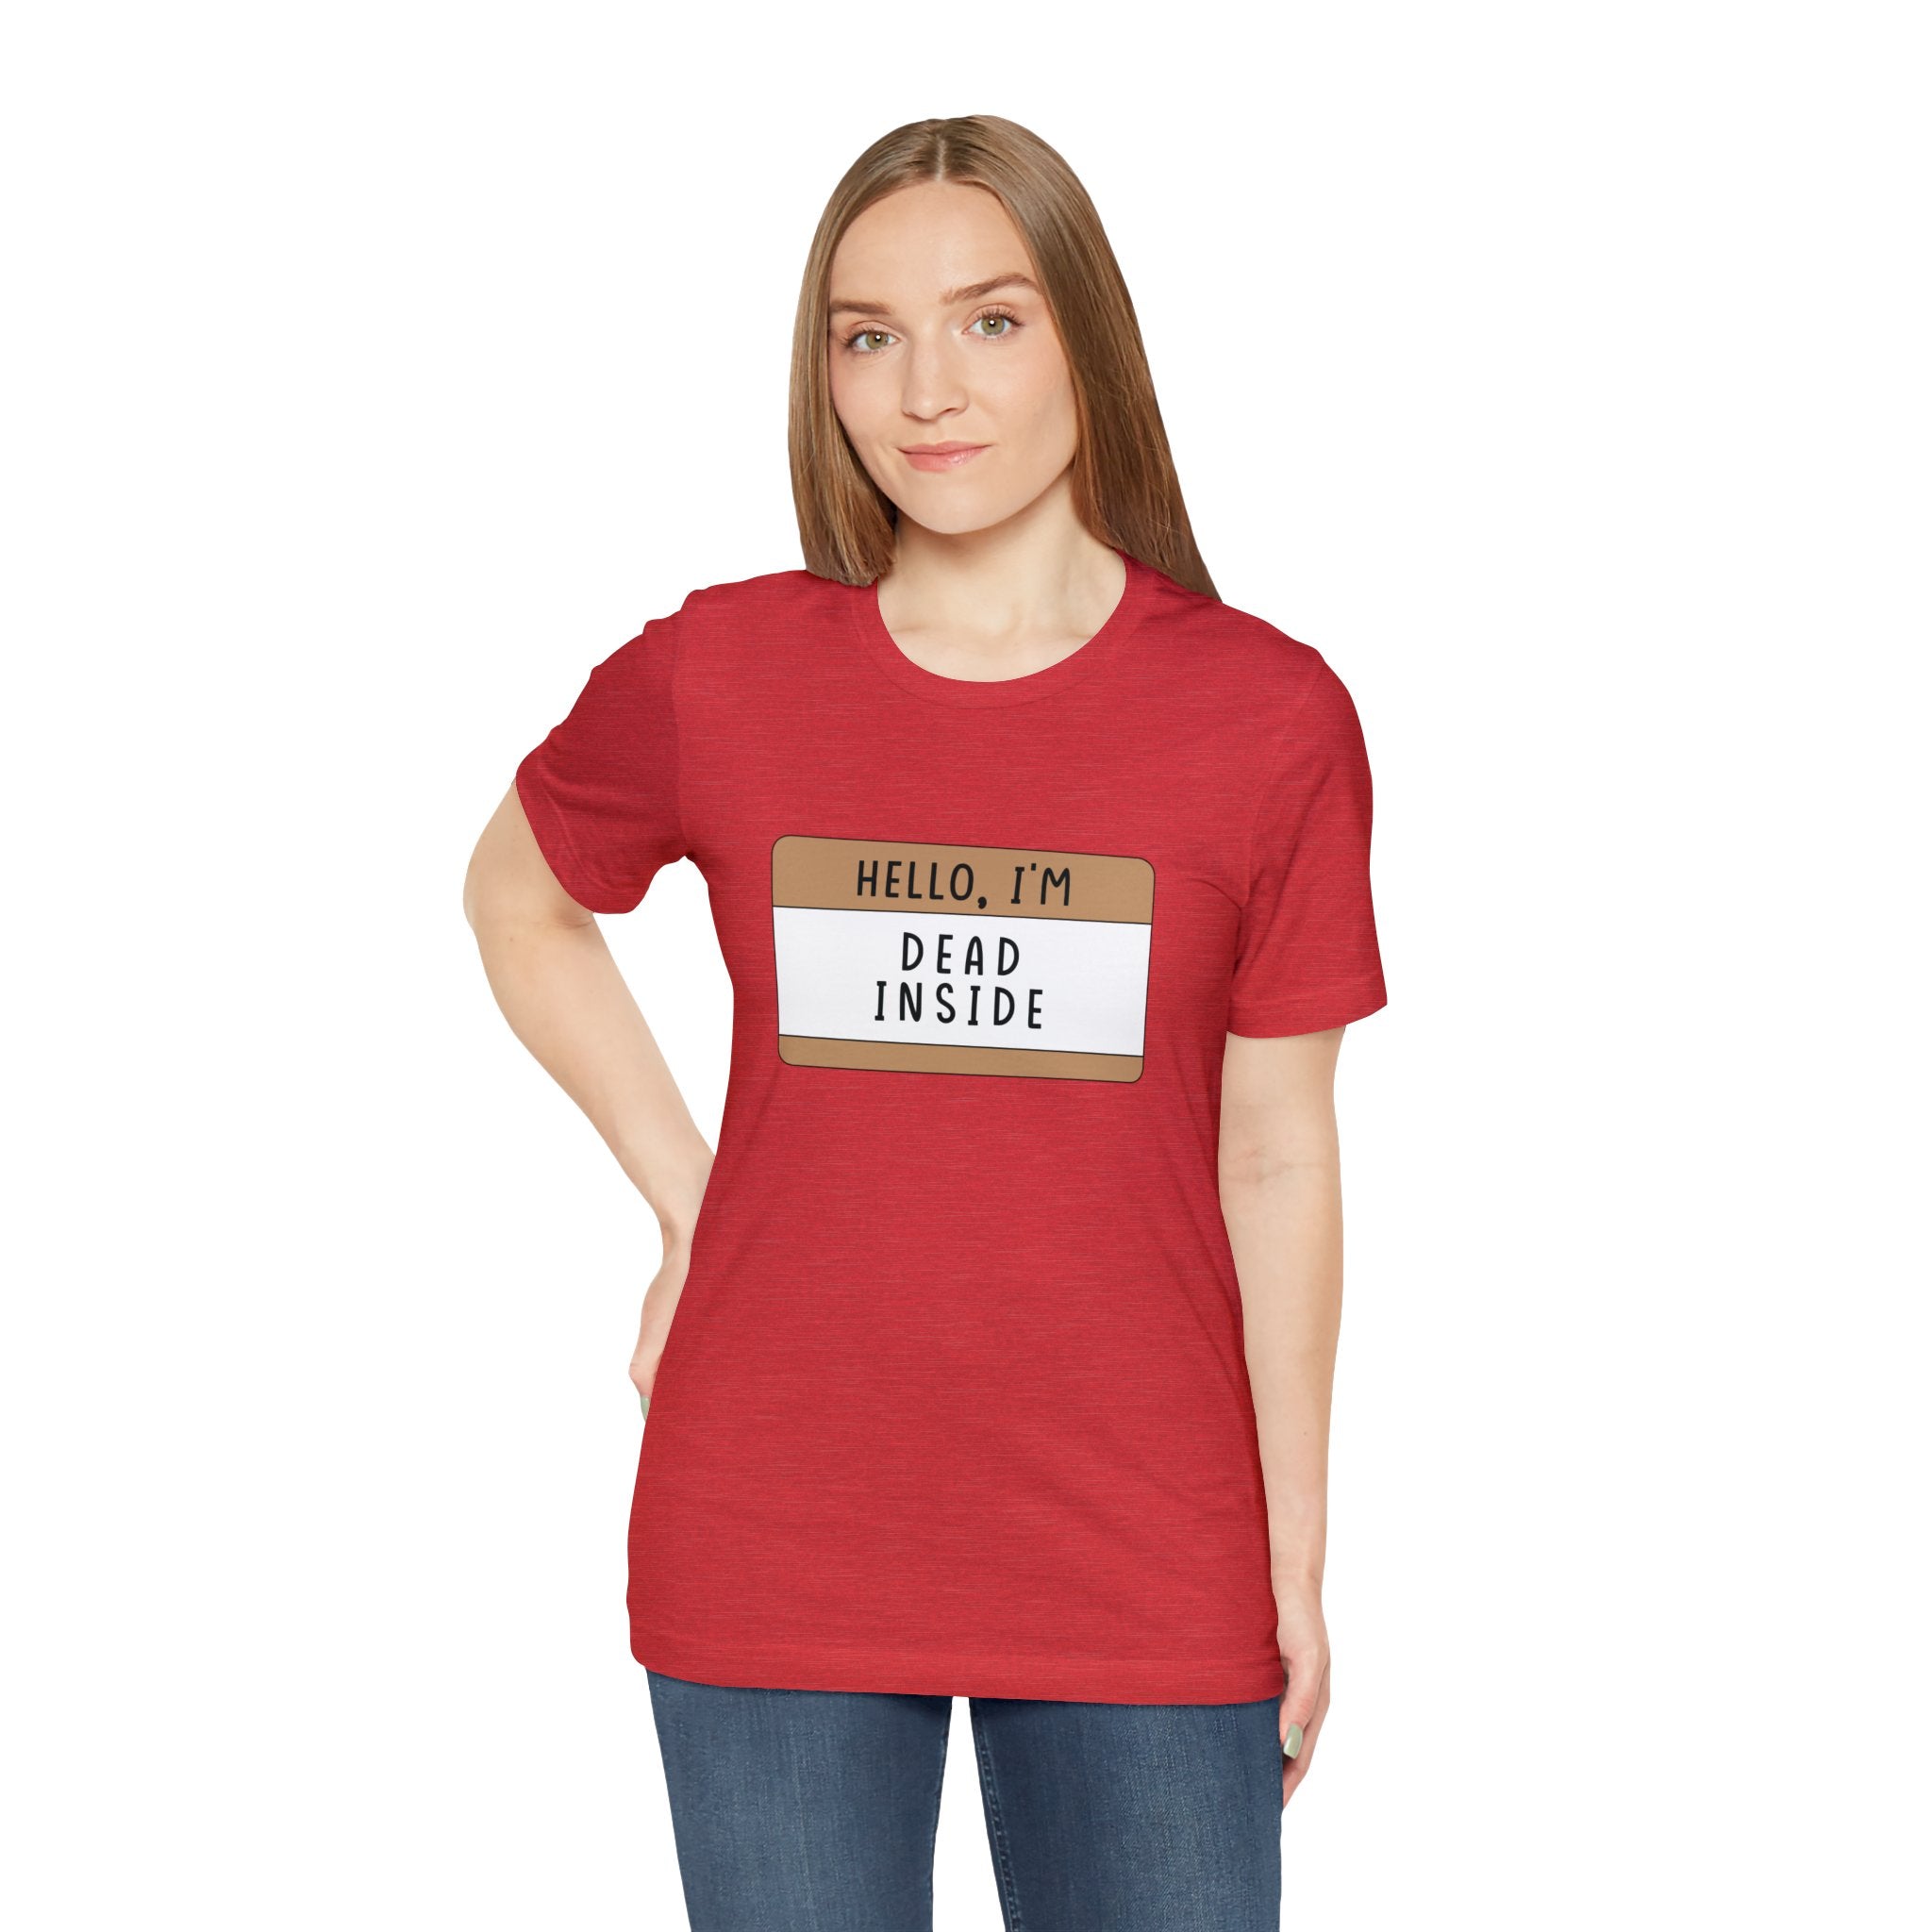 A woman in a red Hello, I'm Dead Inside T-Shirt with the phrase "hello, I'm dead inside" featuring a quirky design, standing against a plain background.